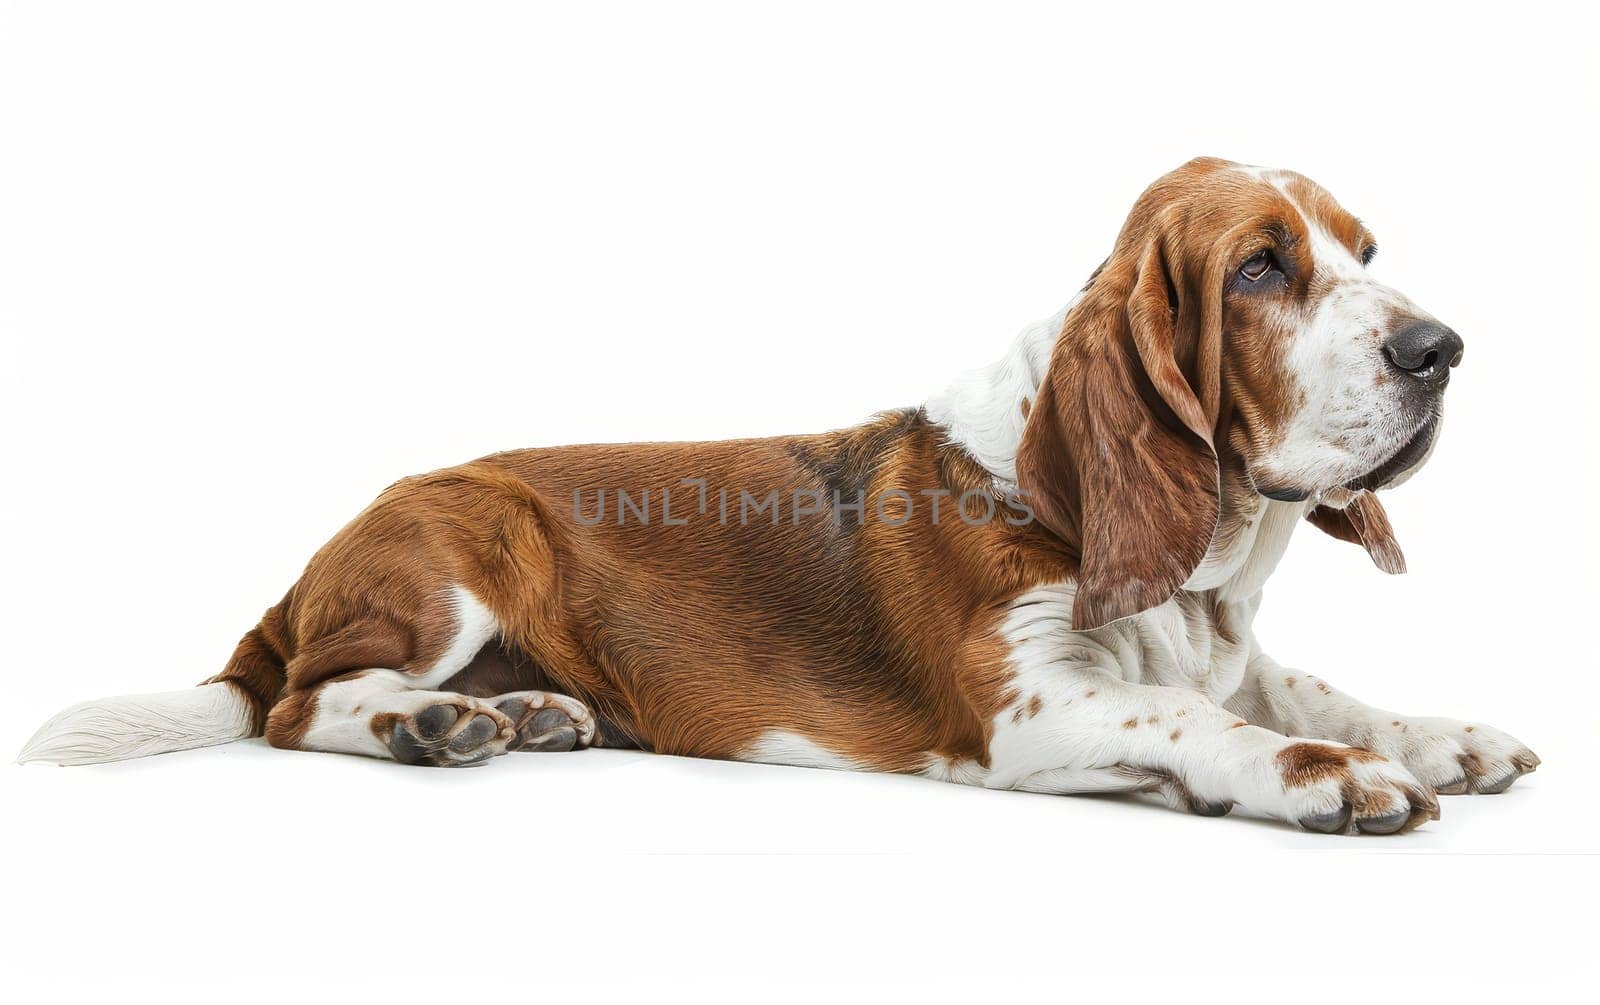 A serene Basset Hound lies gracefully, its brown and white coat spreading out on the floor. The dog's calm demeanor is a picture of tranquility. by sfinks